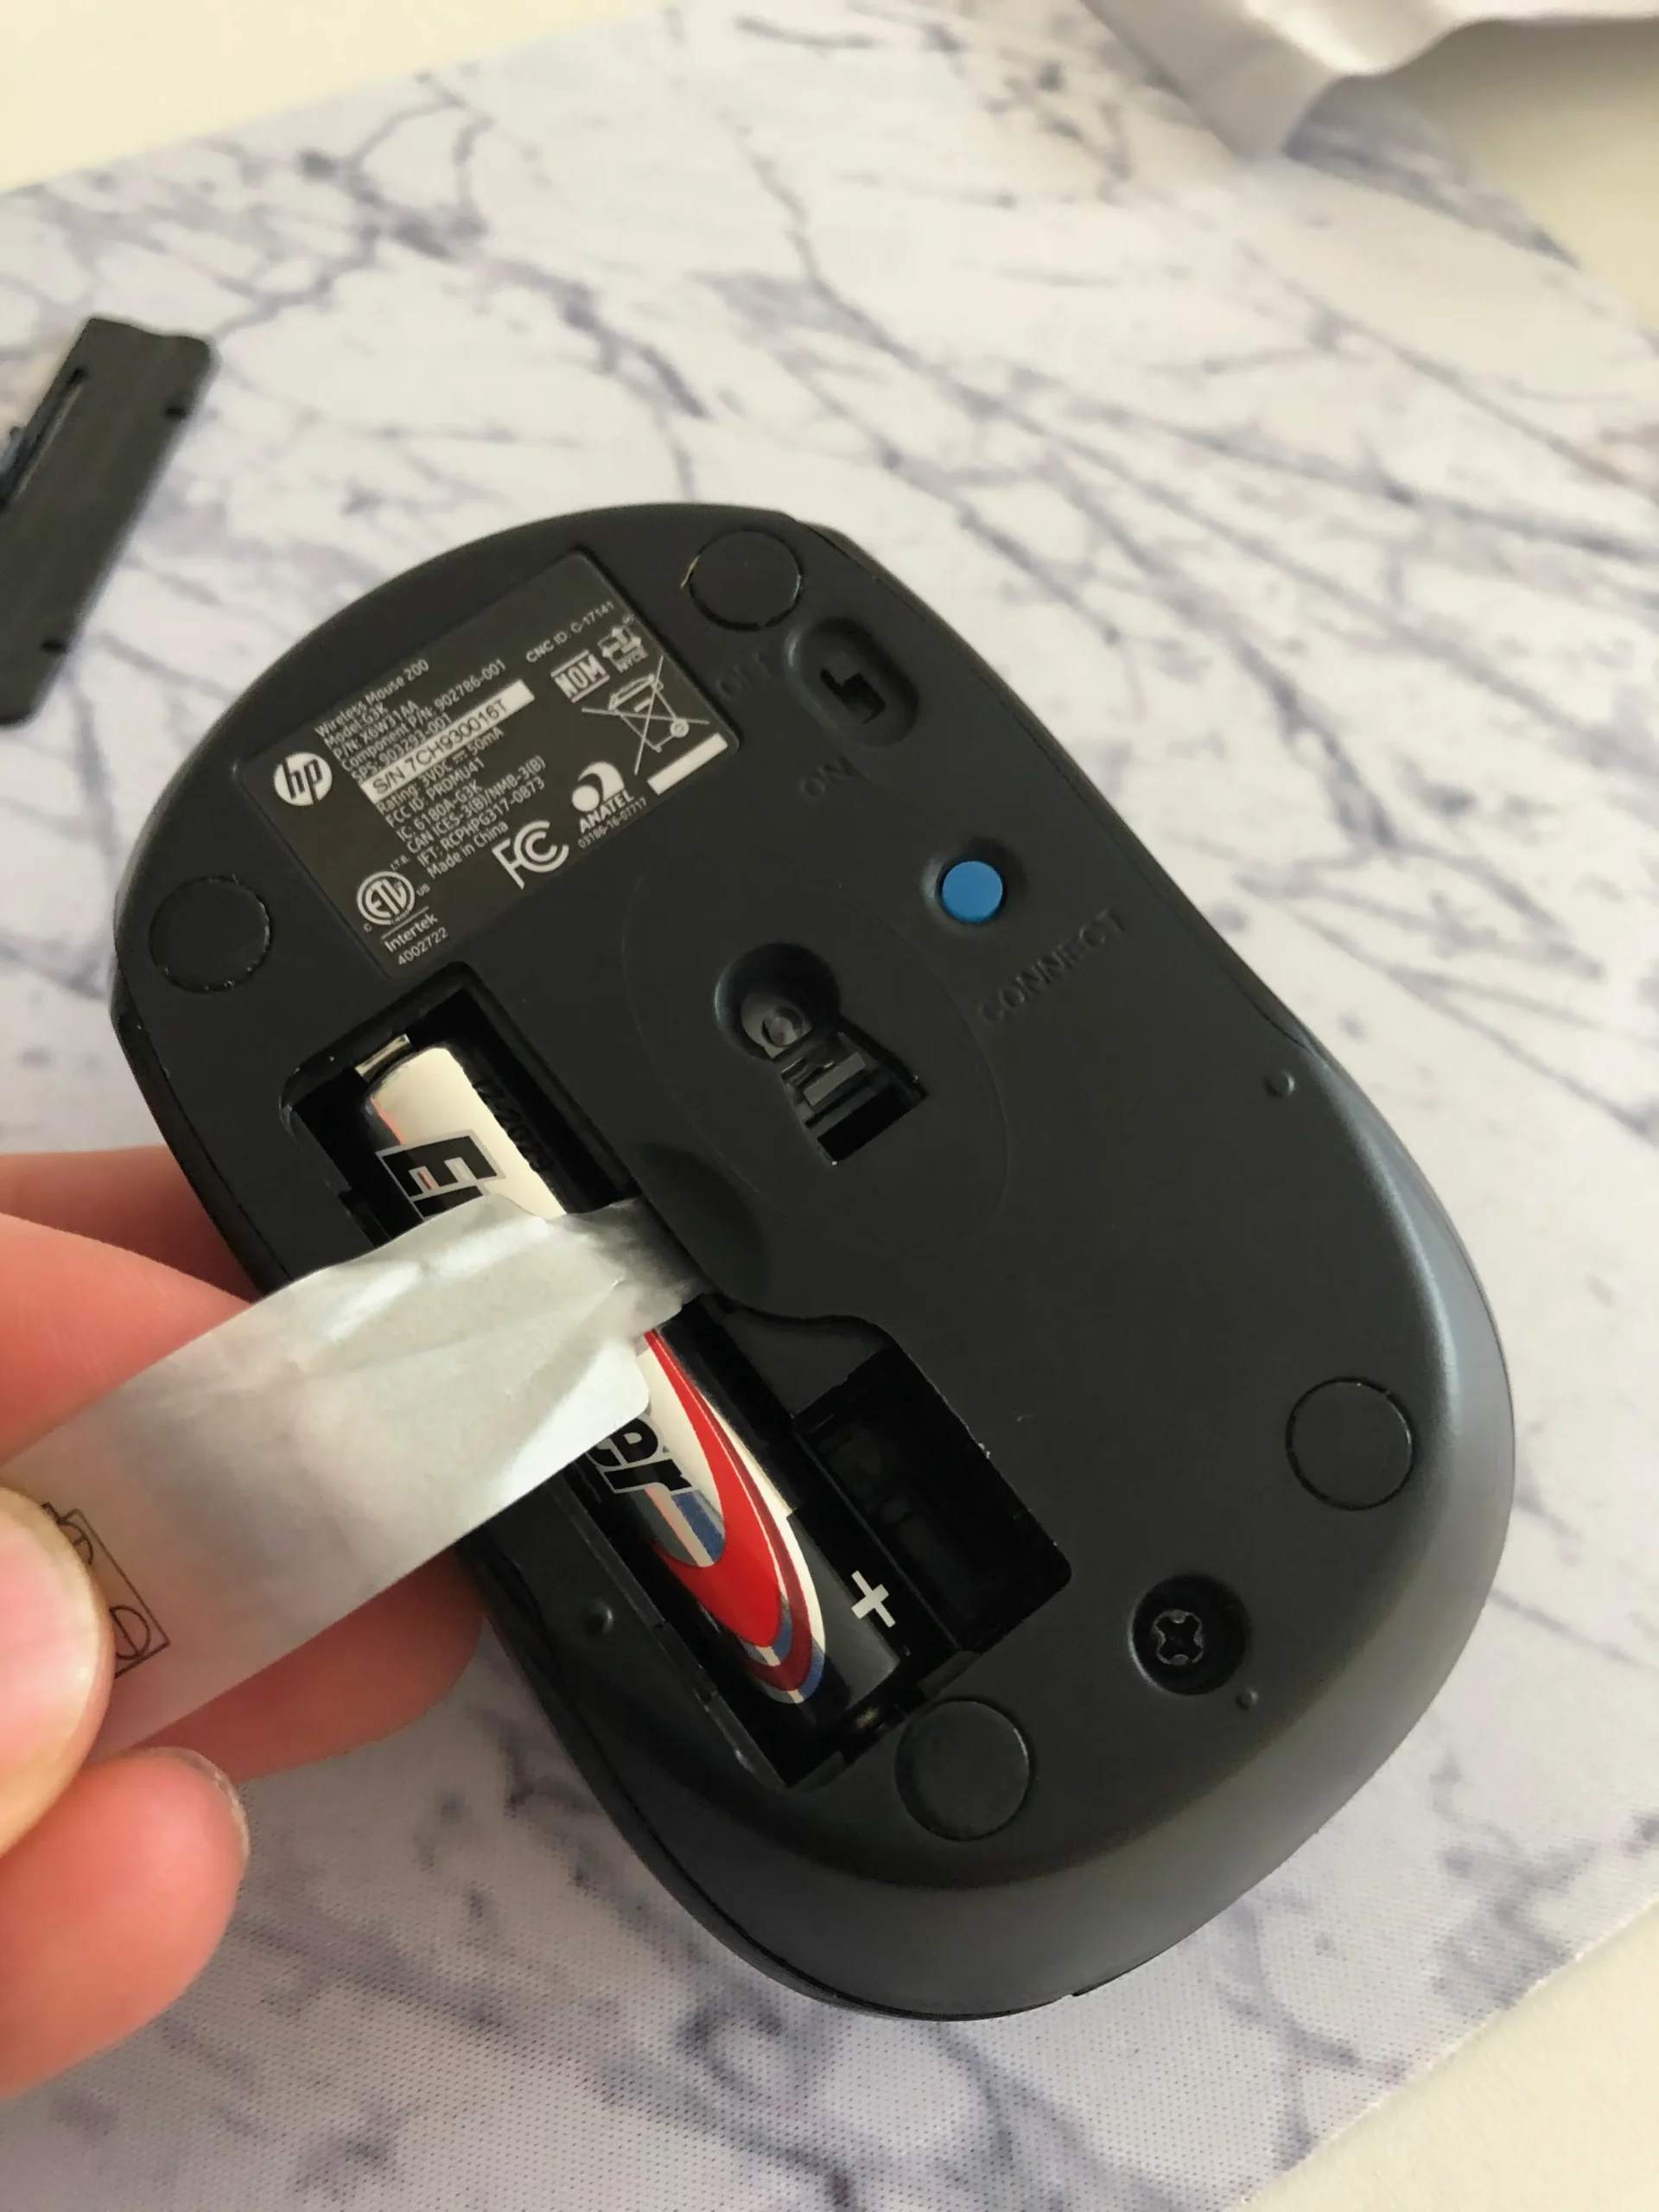 hewlett packard wireless mouse not working - Why is my wireless mouse not working even with new batteries